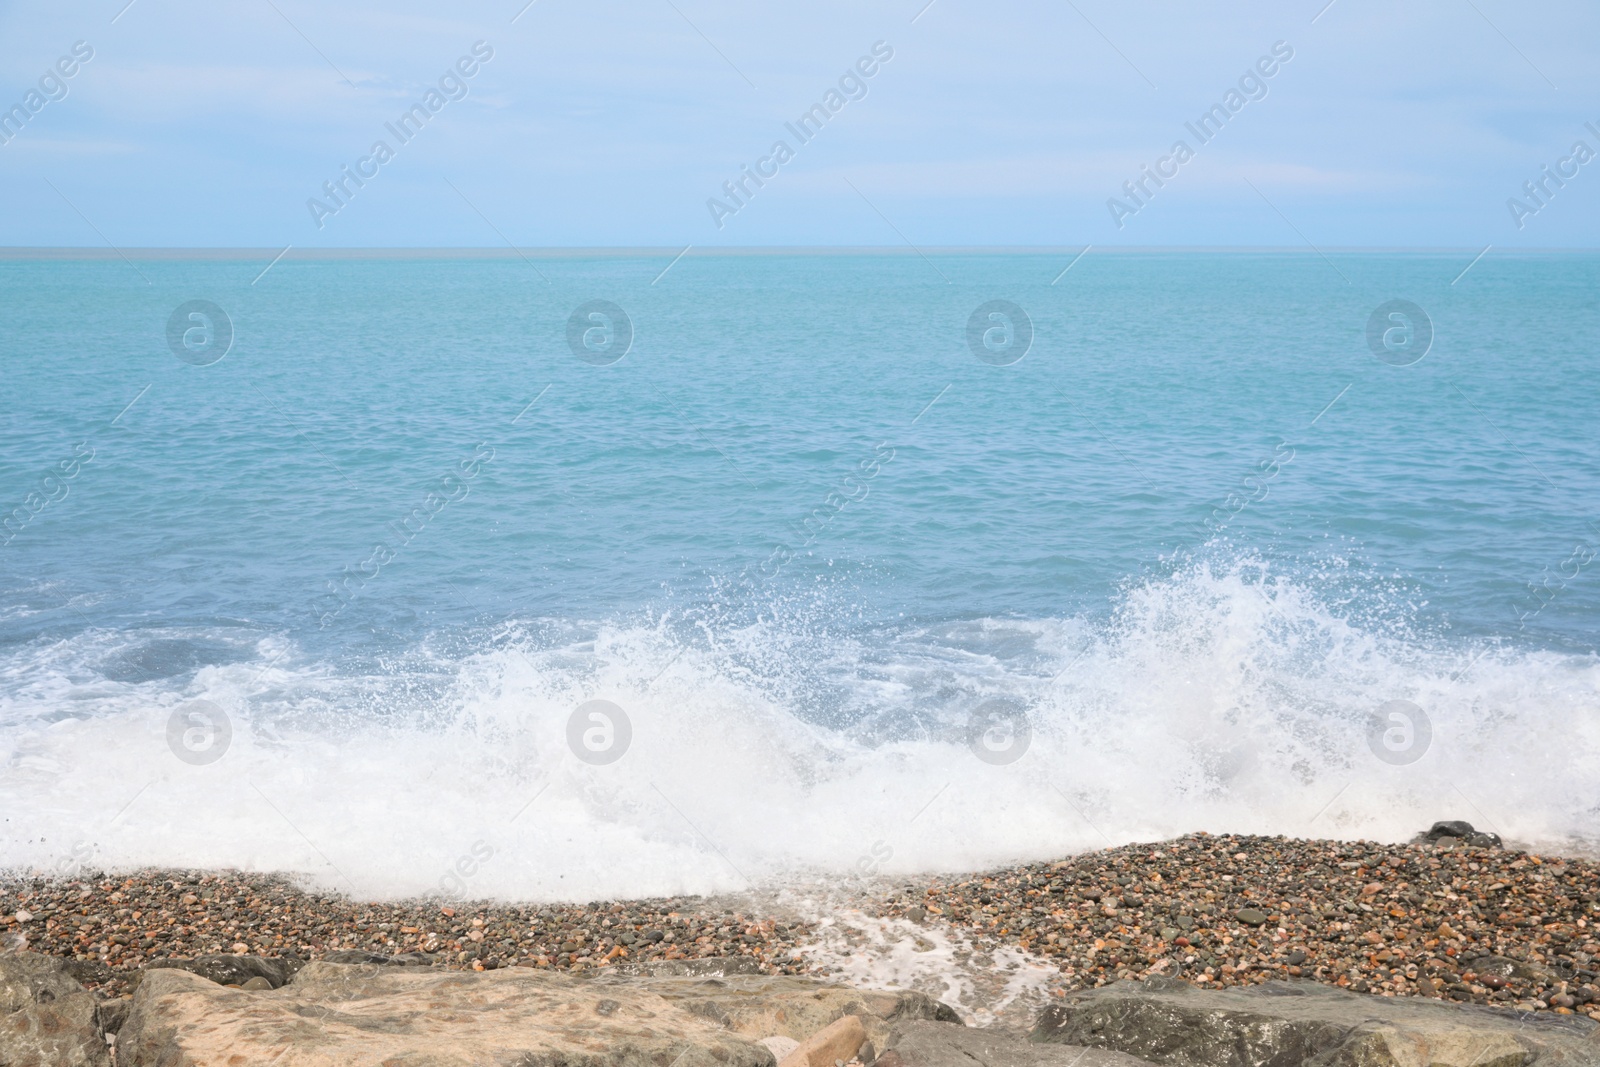 Photo of Picturesque view of foamy waves hitting rocky shore